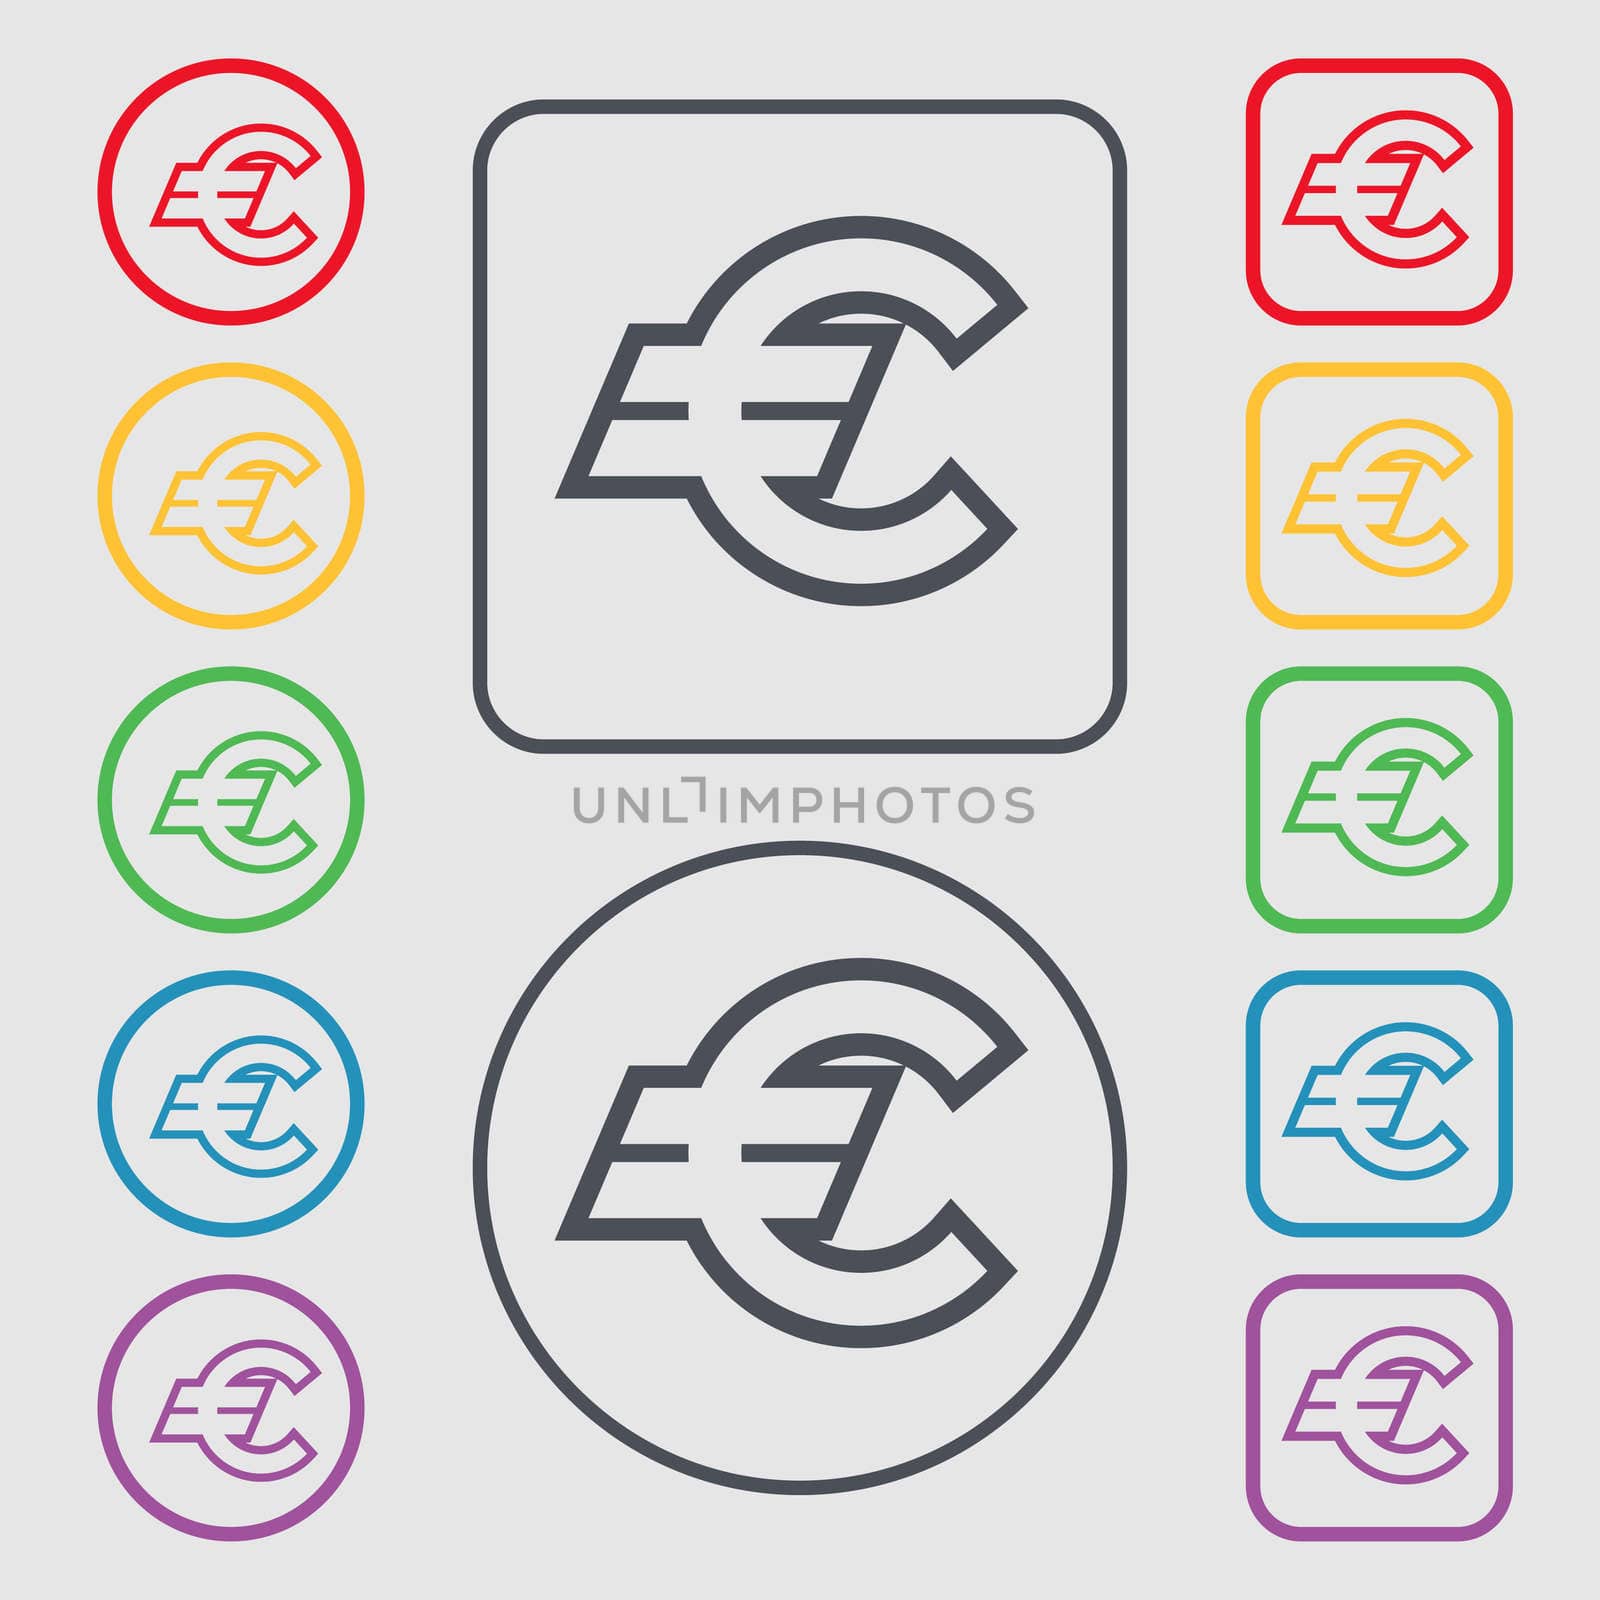 Euro EUR icon sign. symbol on the Round and square buttons with frame. illustration